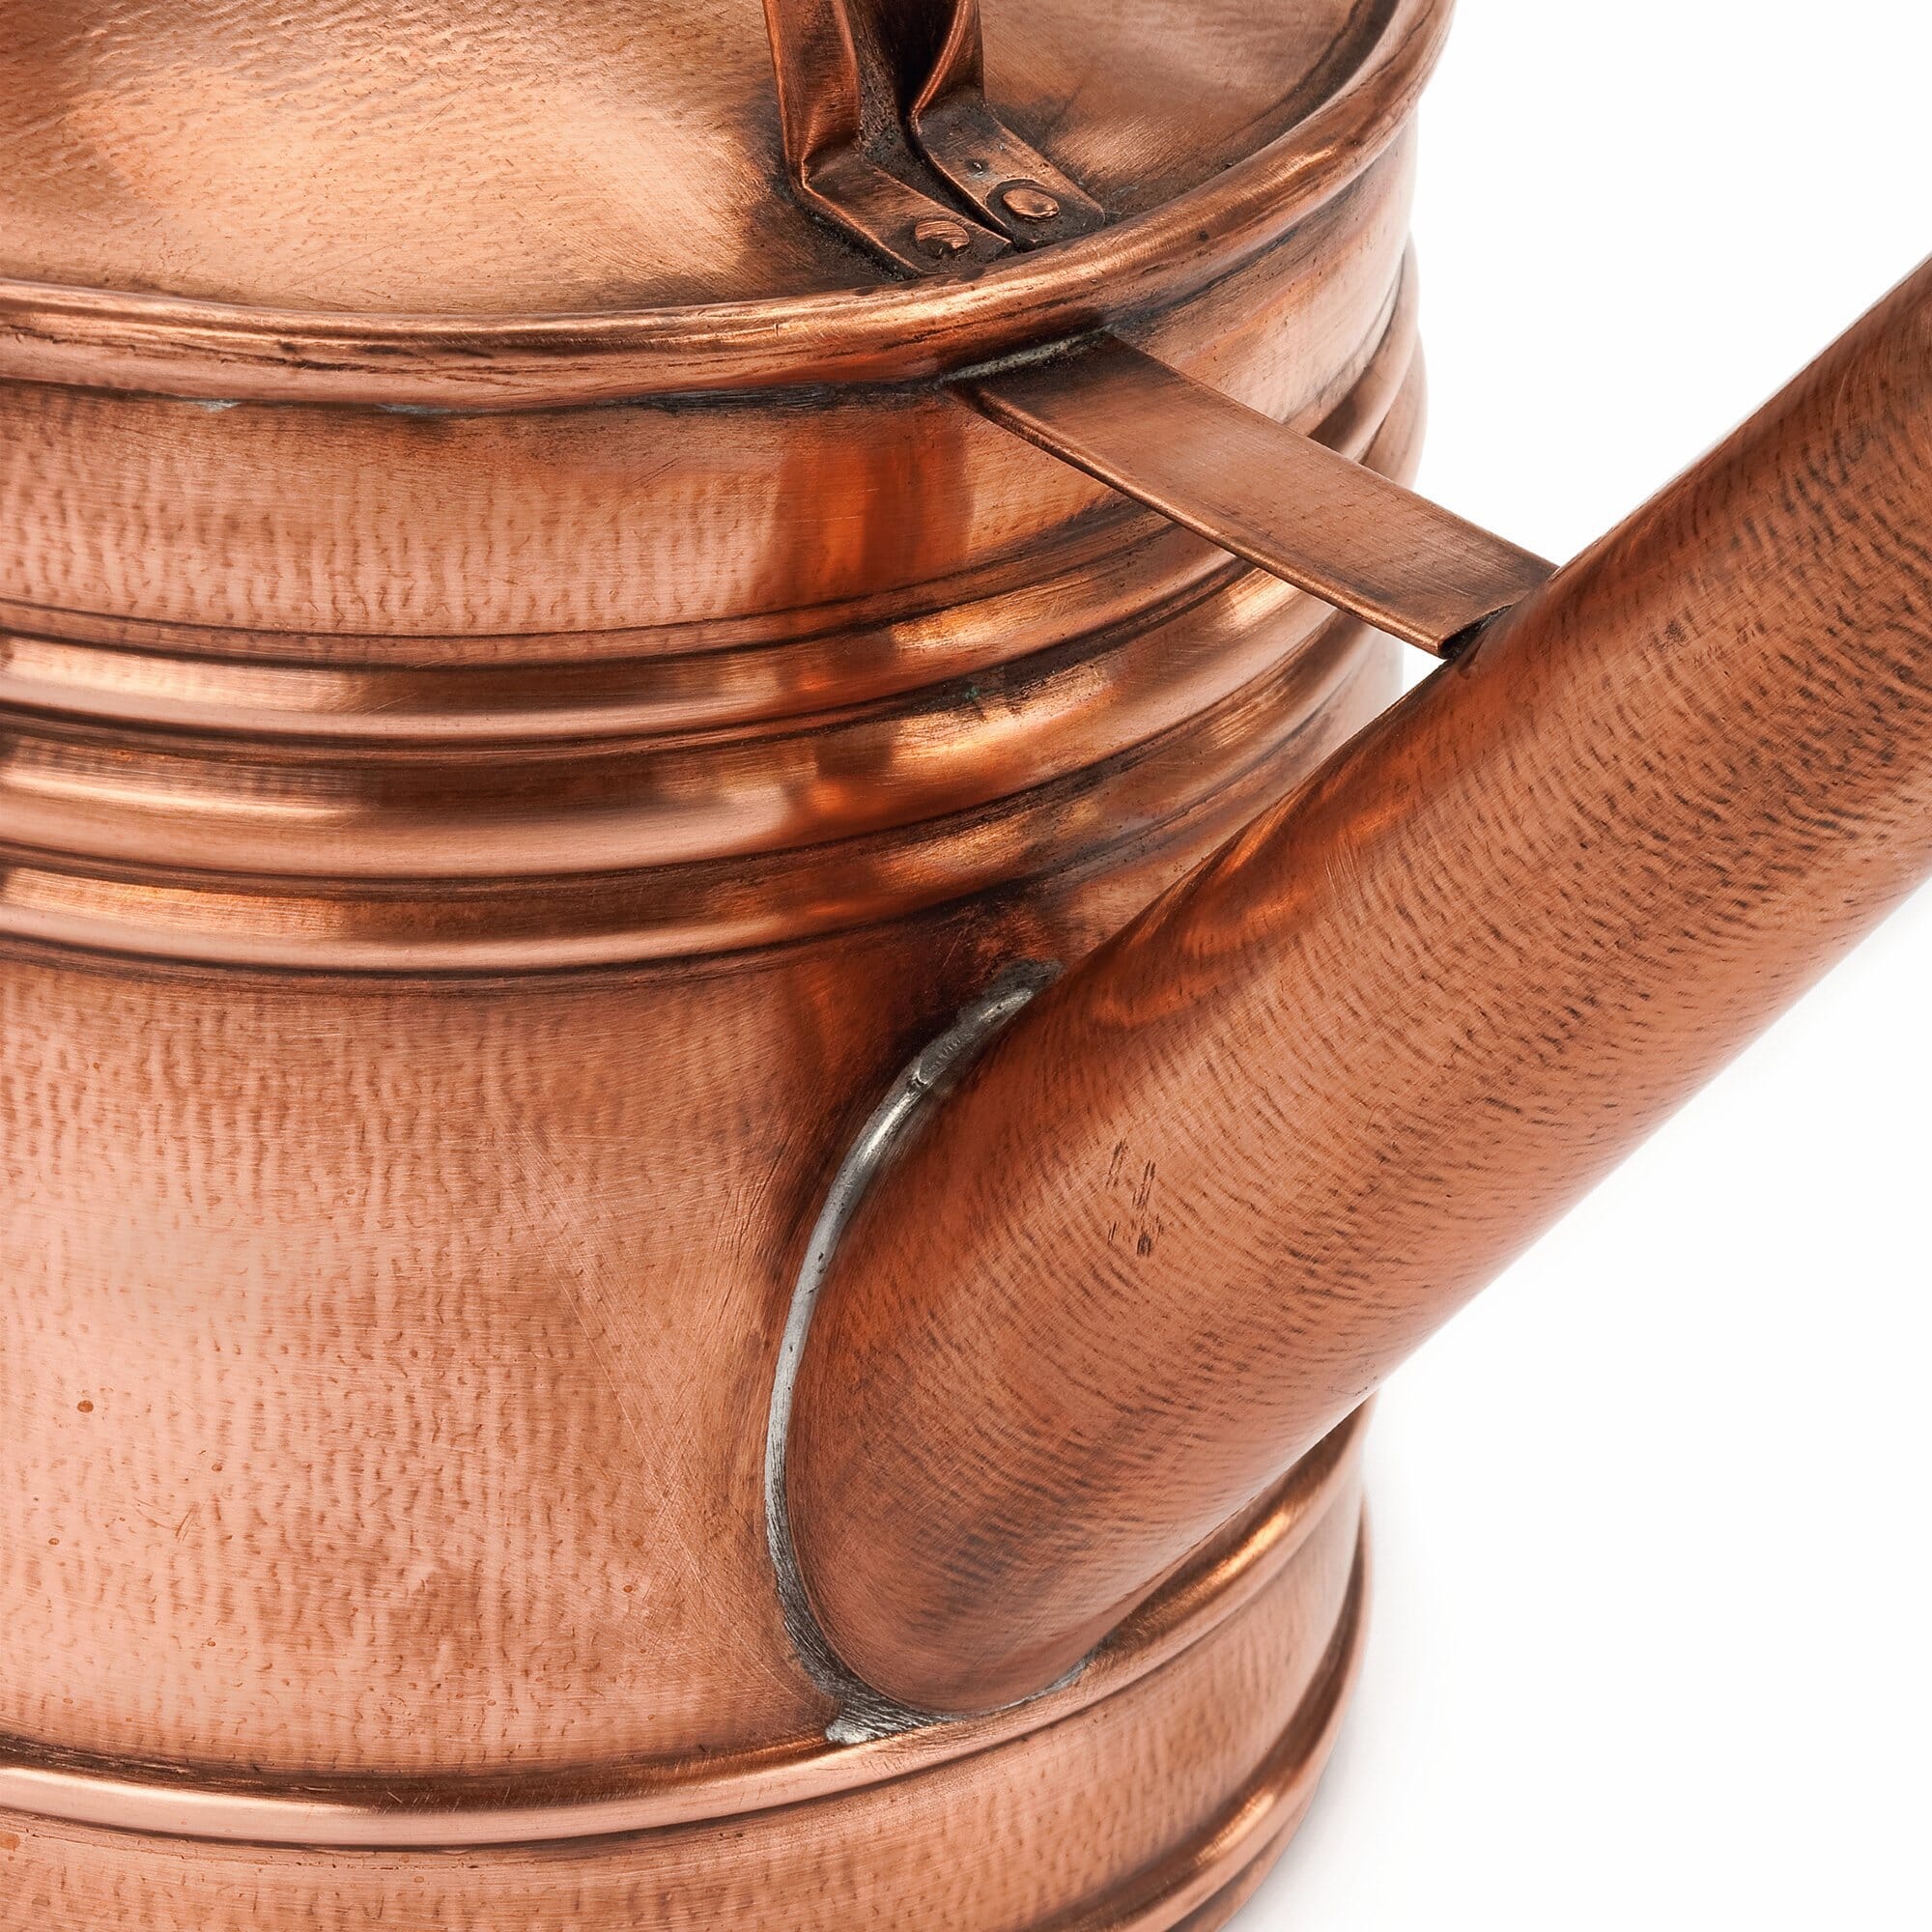 Watering can copper